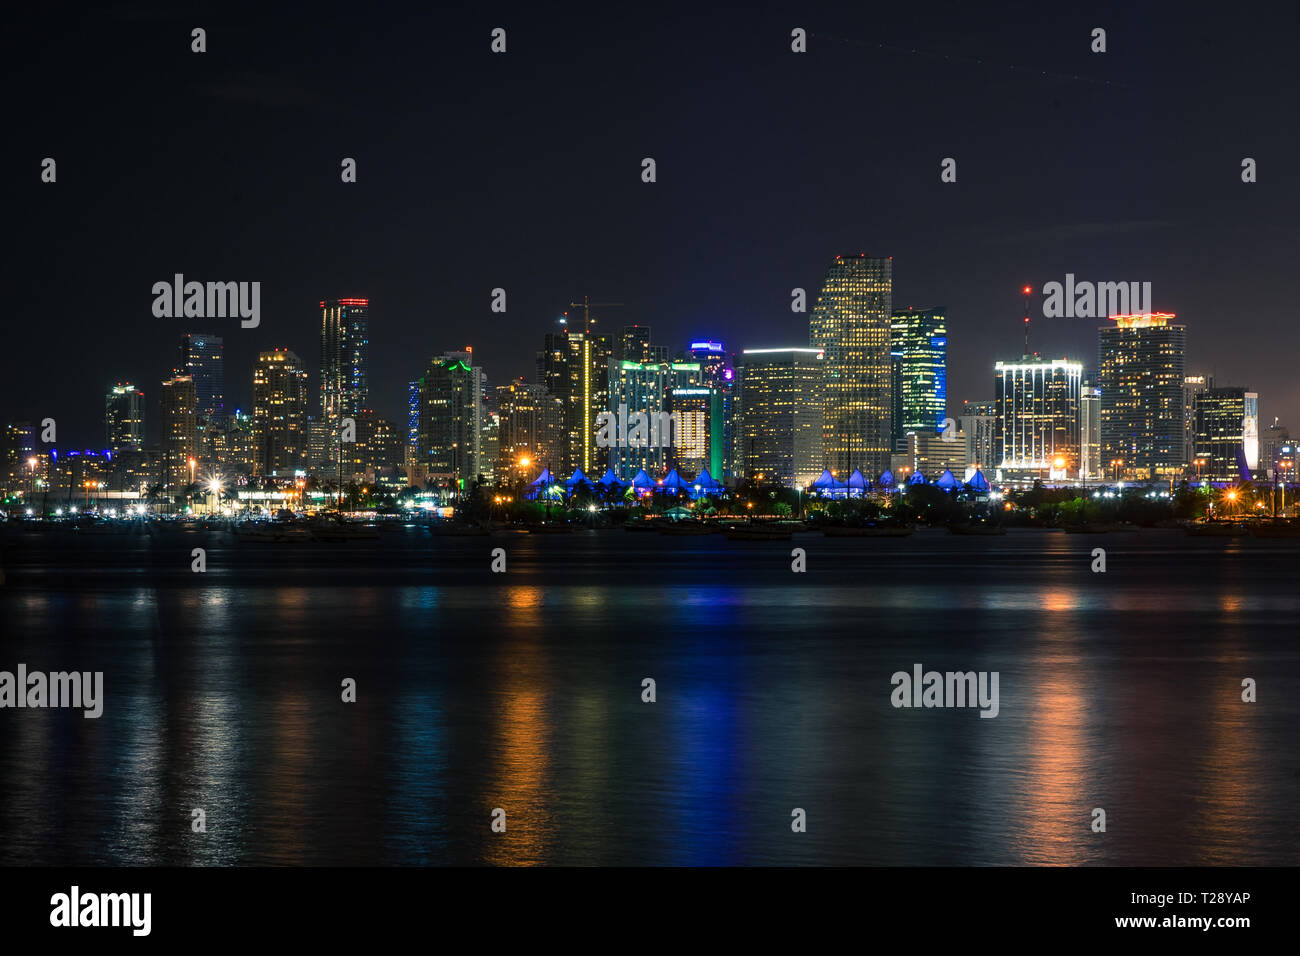 Night Scenery of Miami City Scape across the water. Neon lit skyscrpaers Stock Photo